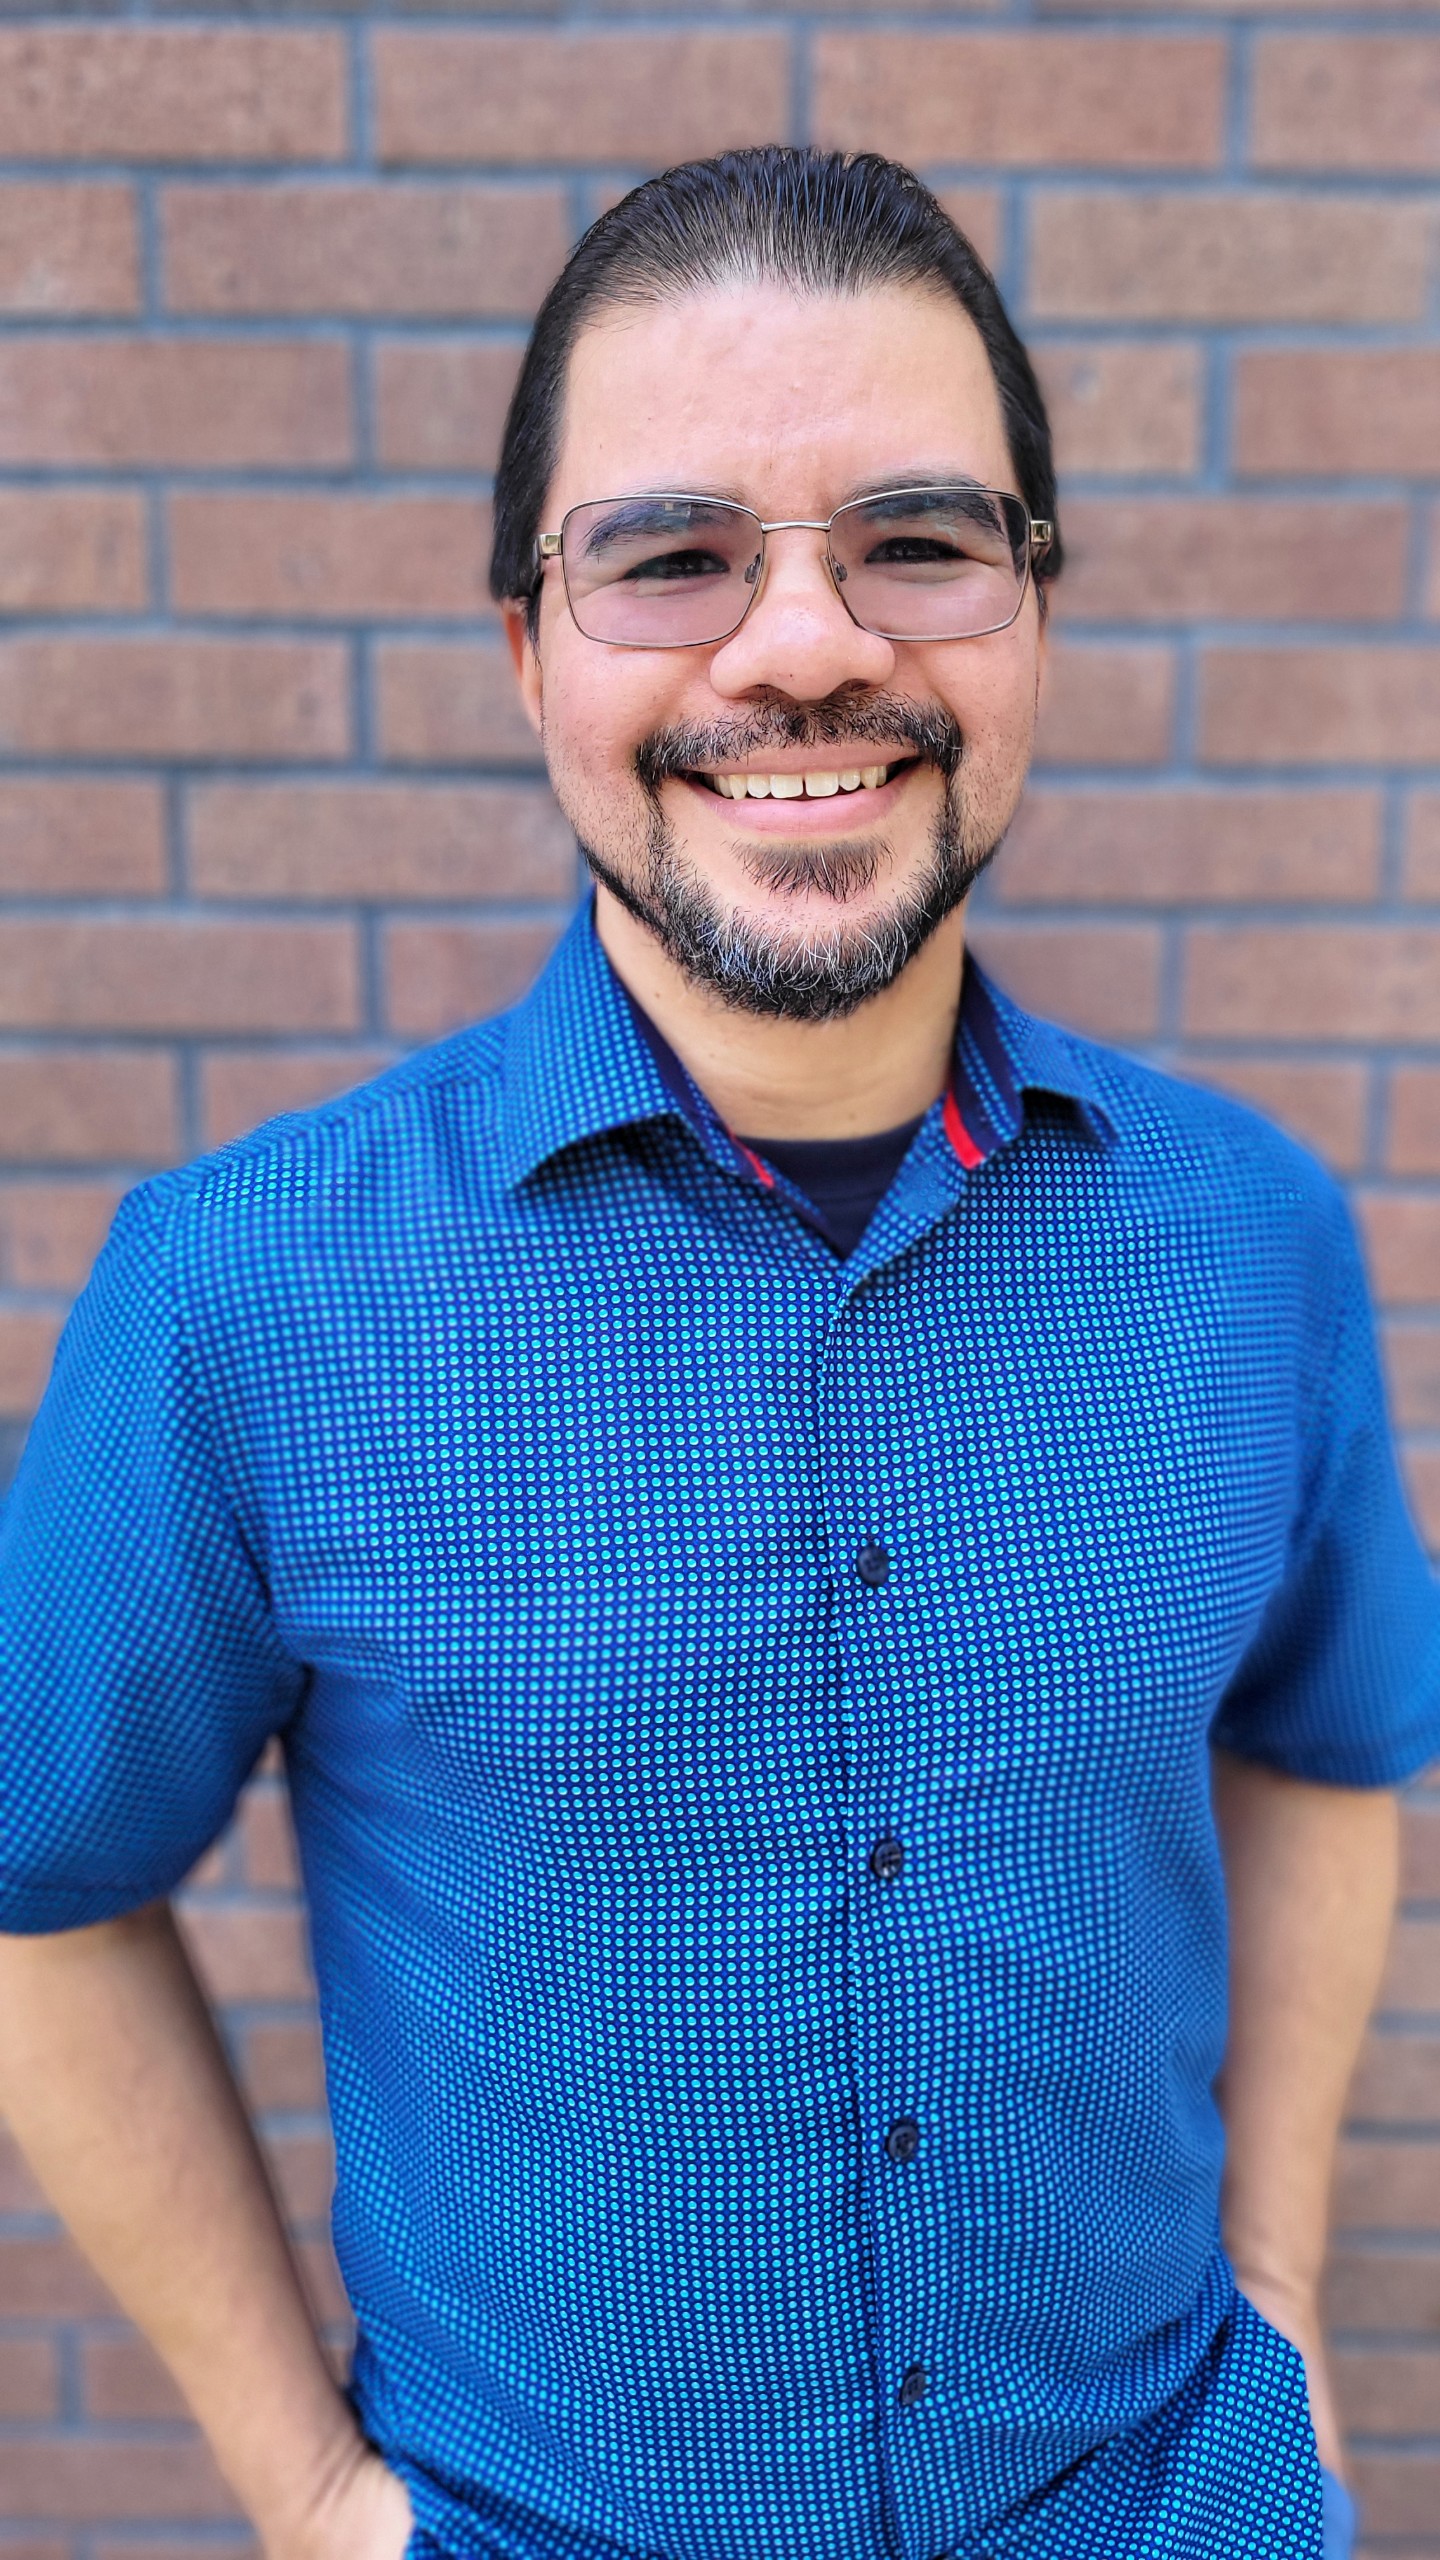 A Hispanic man with glasses and a blue shirt is smiling